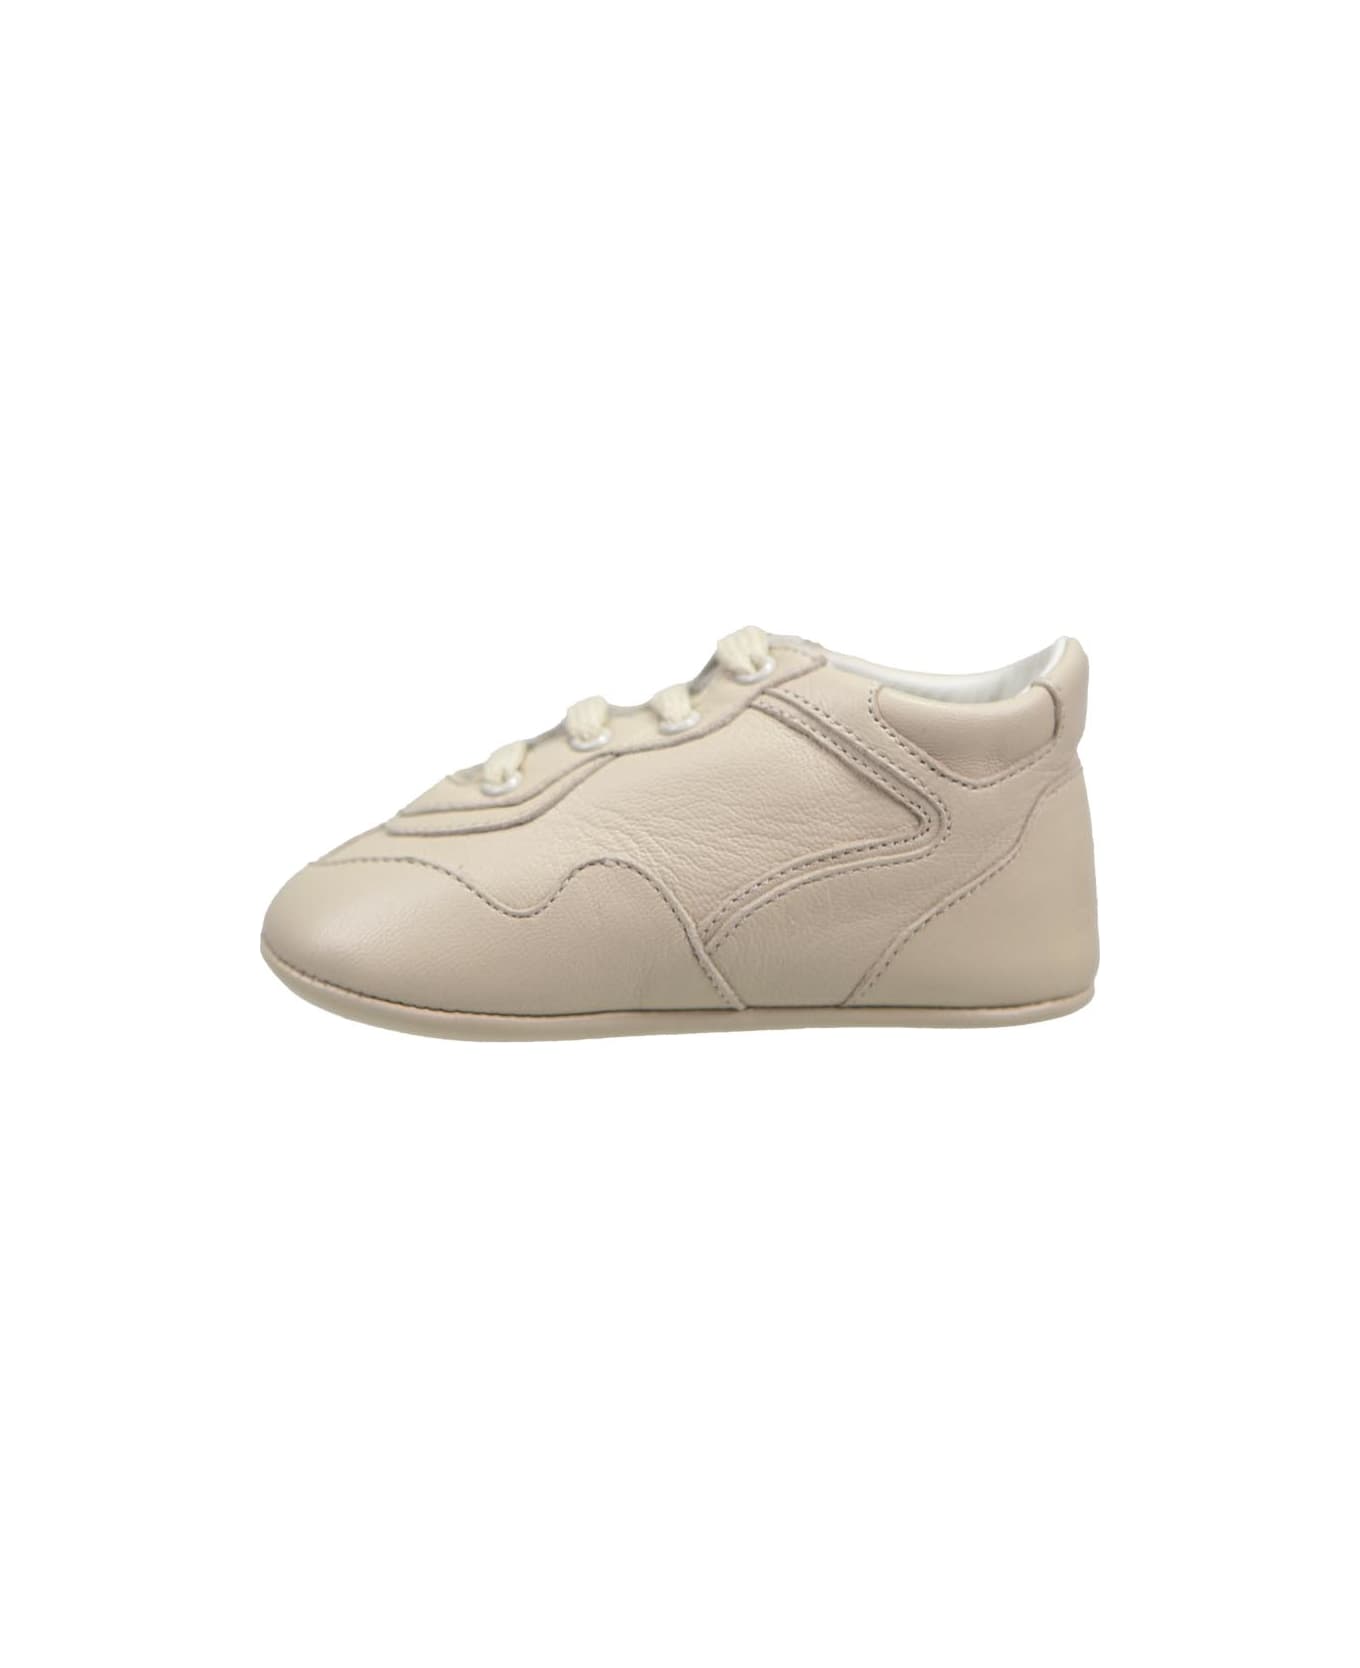 Gucci Leather Shoes - White